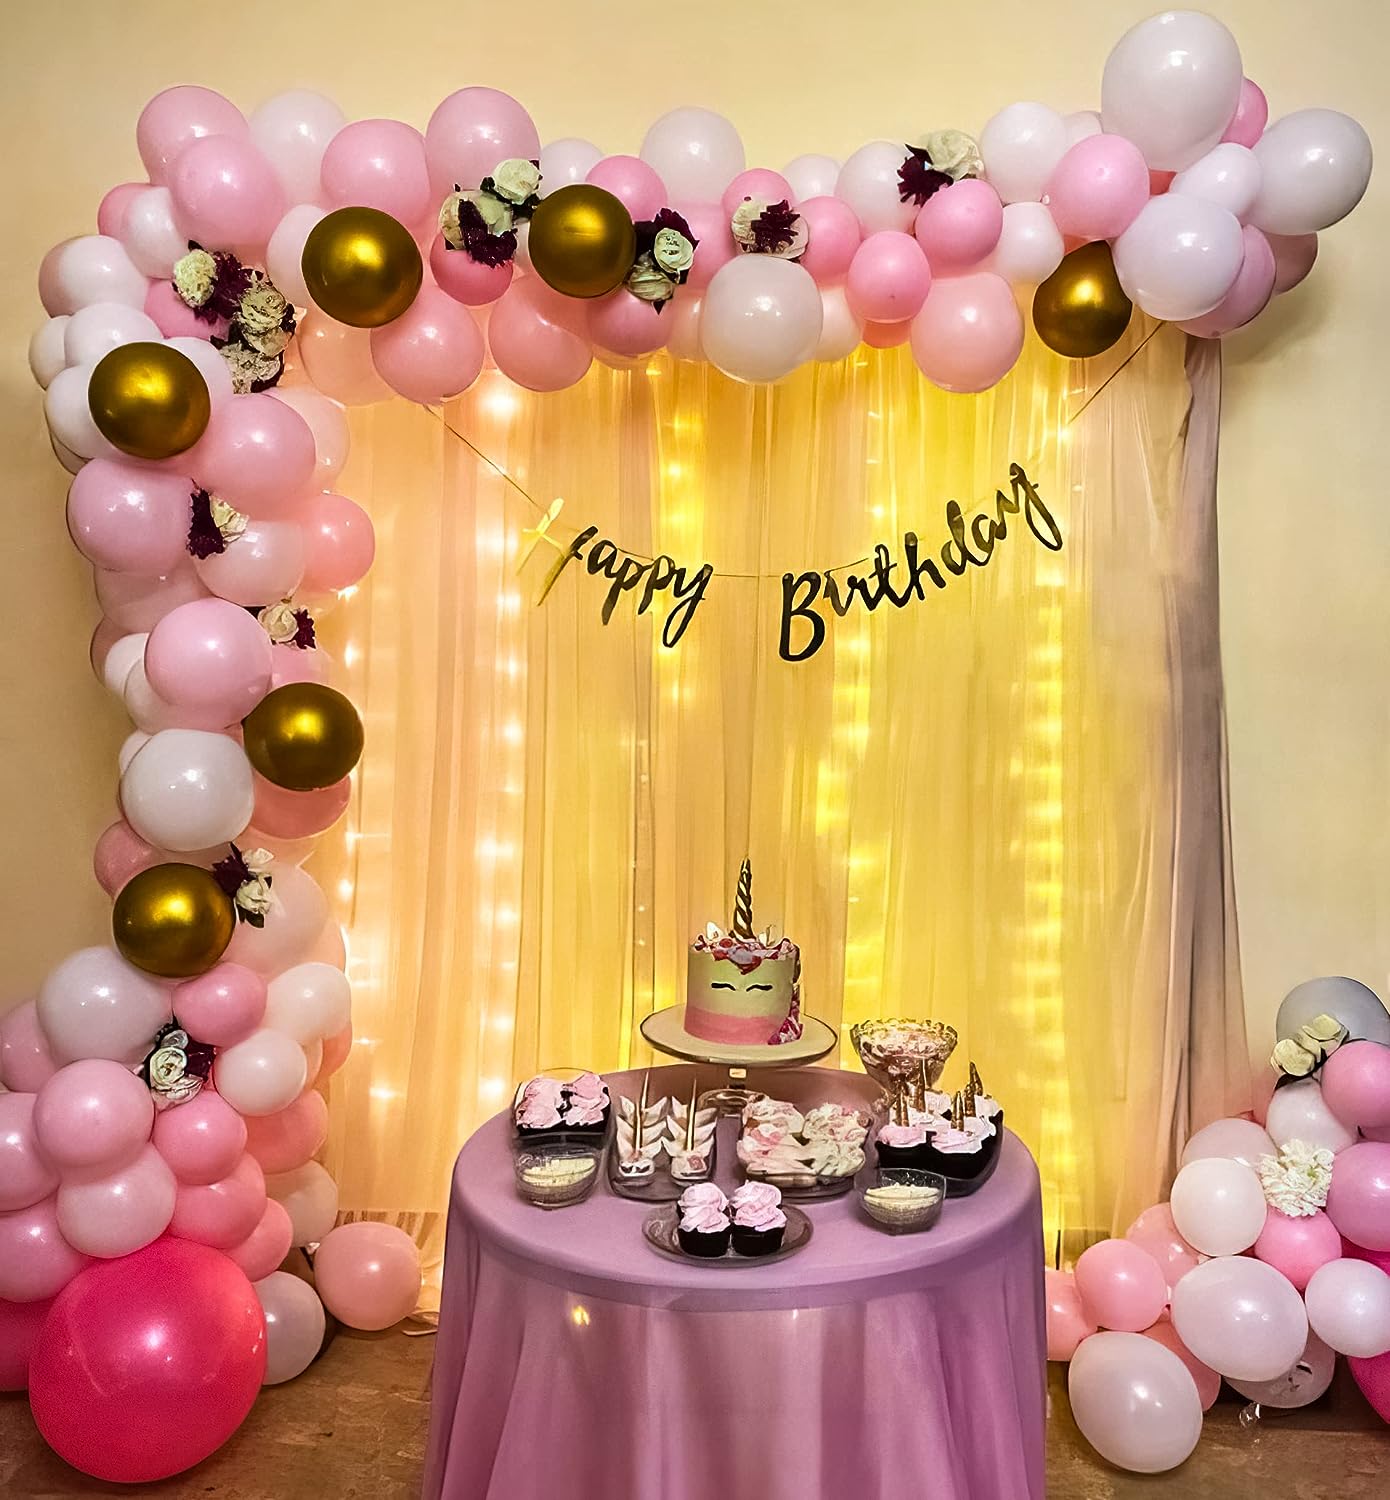 Pink and White Balloon Birthday Decoration Kit for Girls